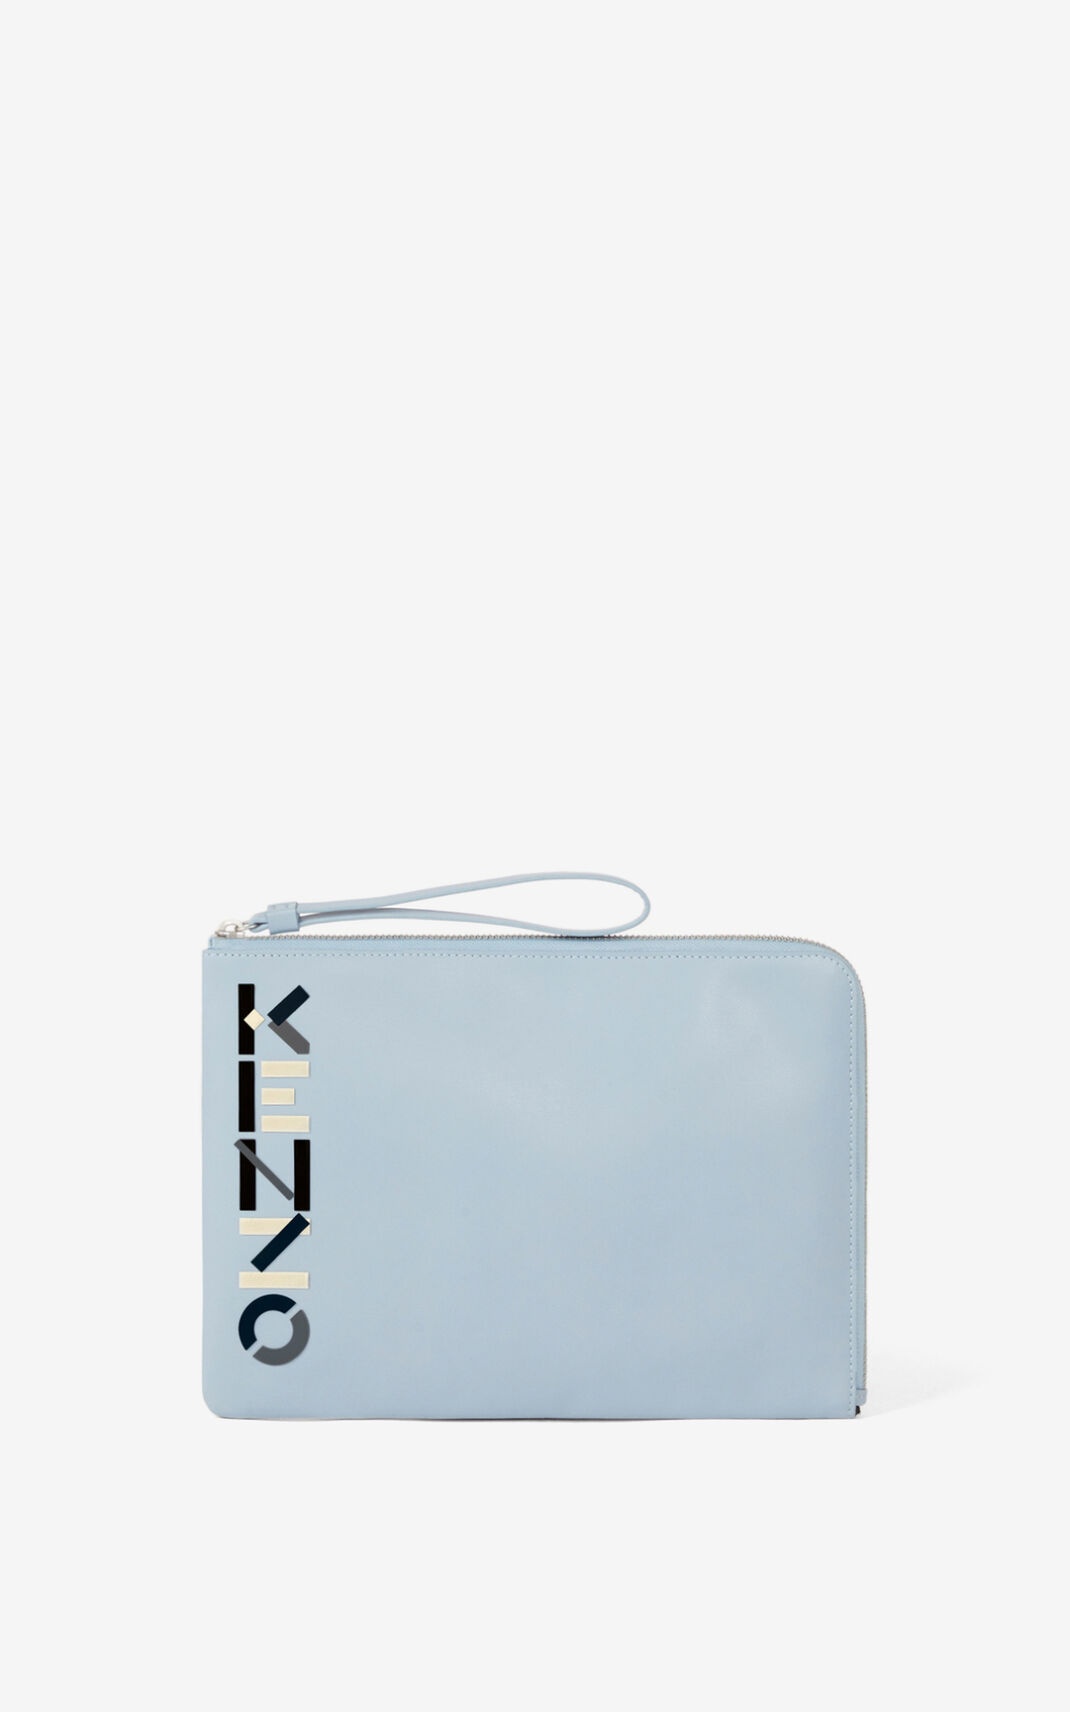 The Winter Capsule' KENZO Logo large leather clutch - 2